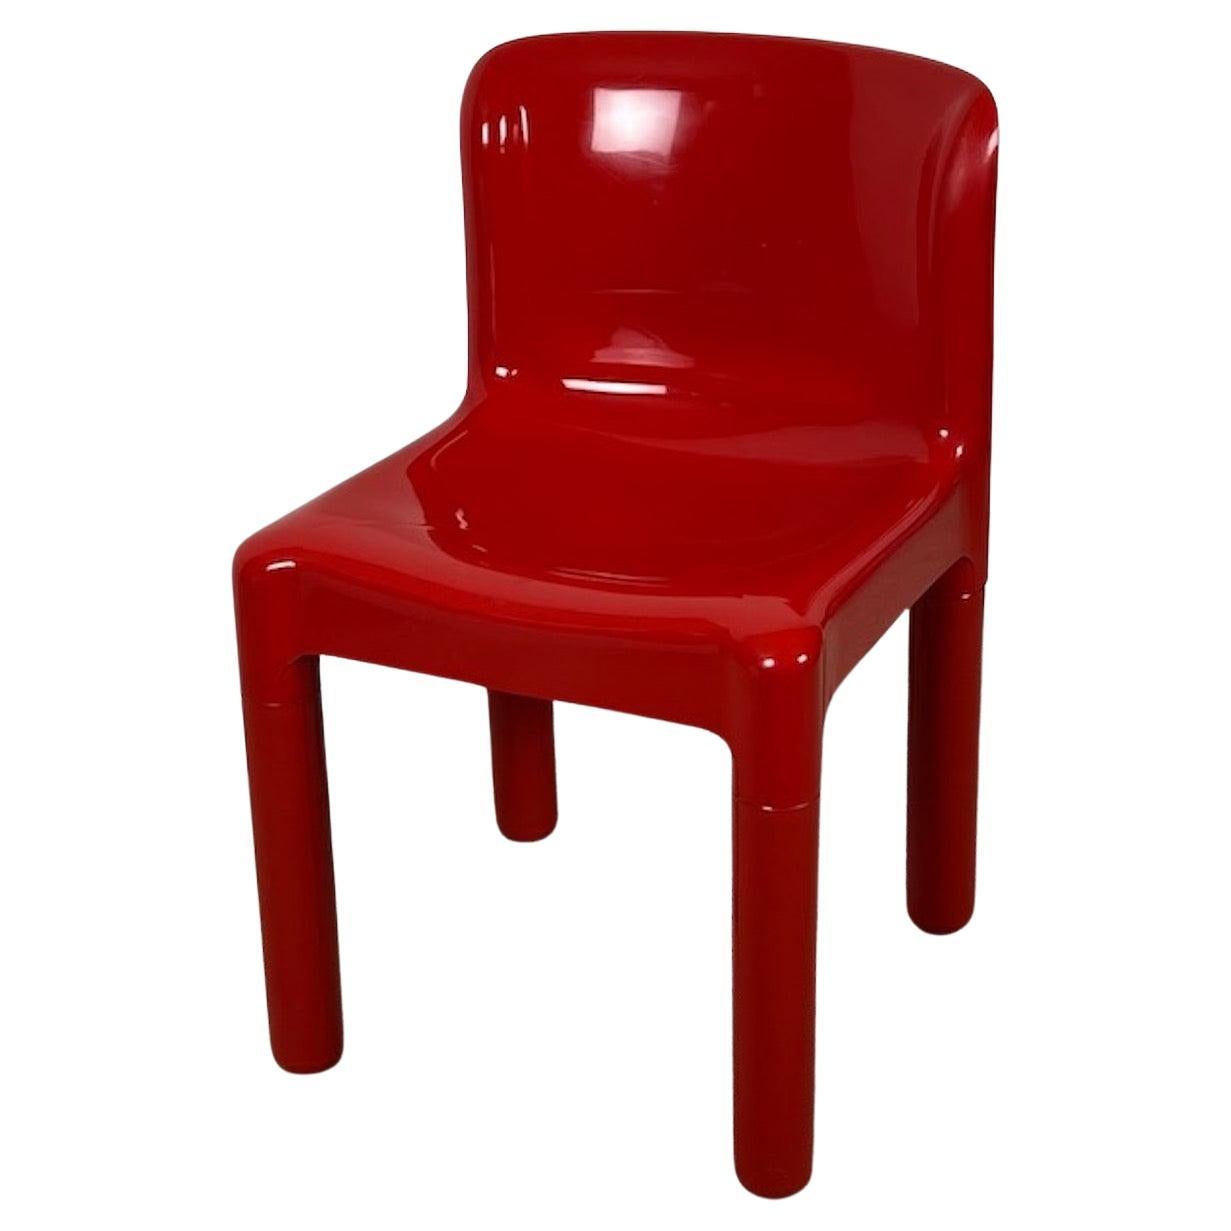 Kartell 4875 Chair by Carlo Bartoli in Glossy Red, 1980s Edition For Sale